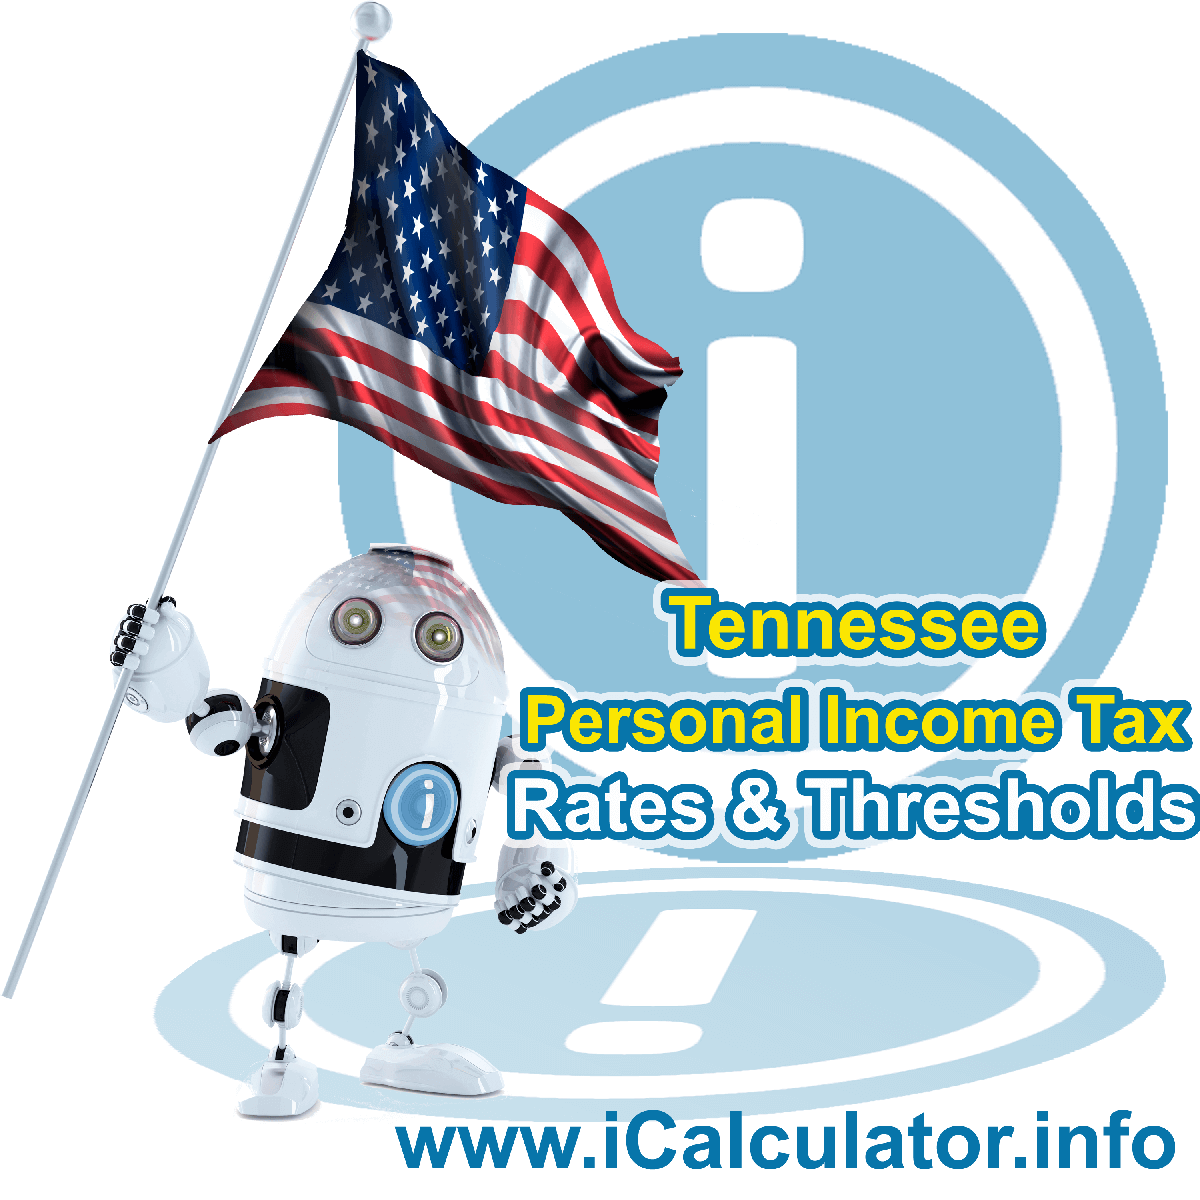 Tennessee State Tax Tables 2019. This image displays details of the Tennessee State Tax Tables for the 2019 tax return year which is provided in support of the 2019 US Tax Calculator